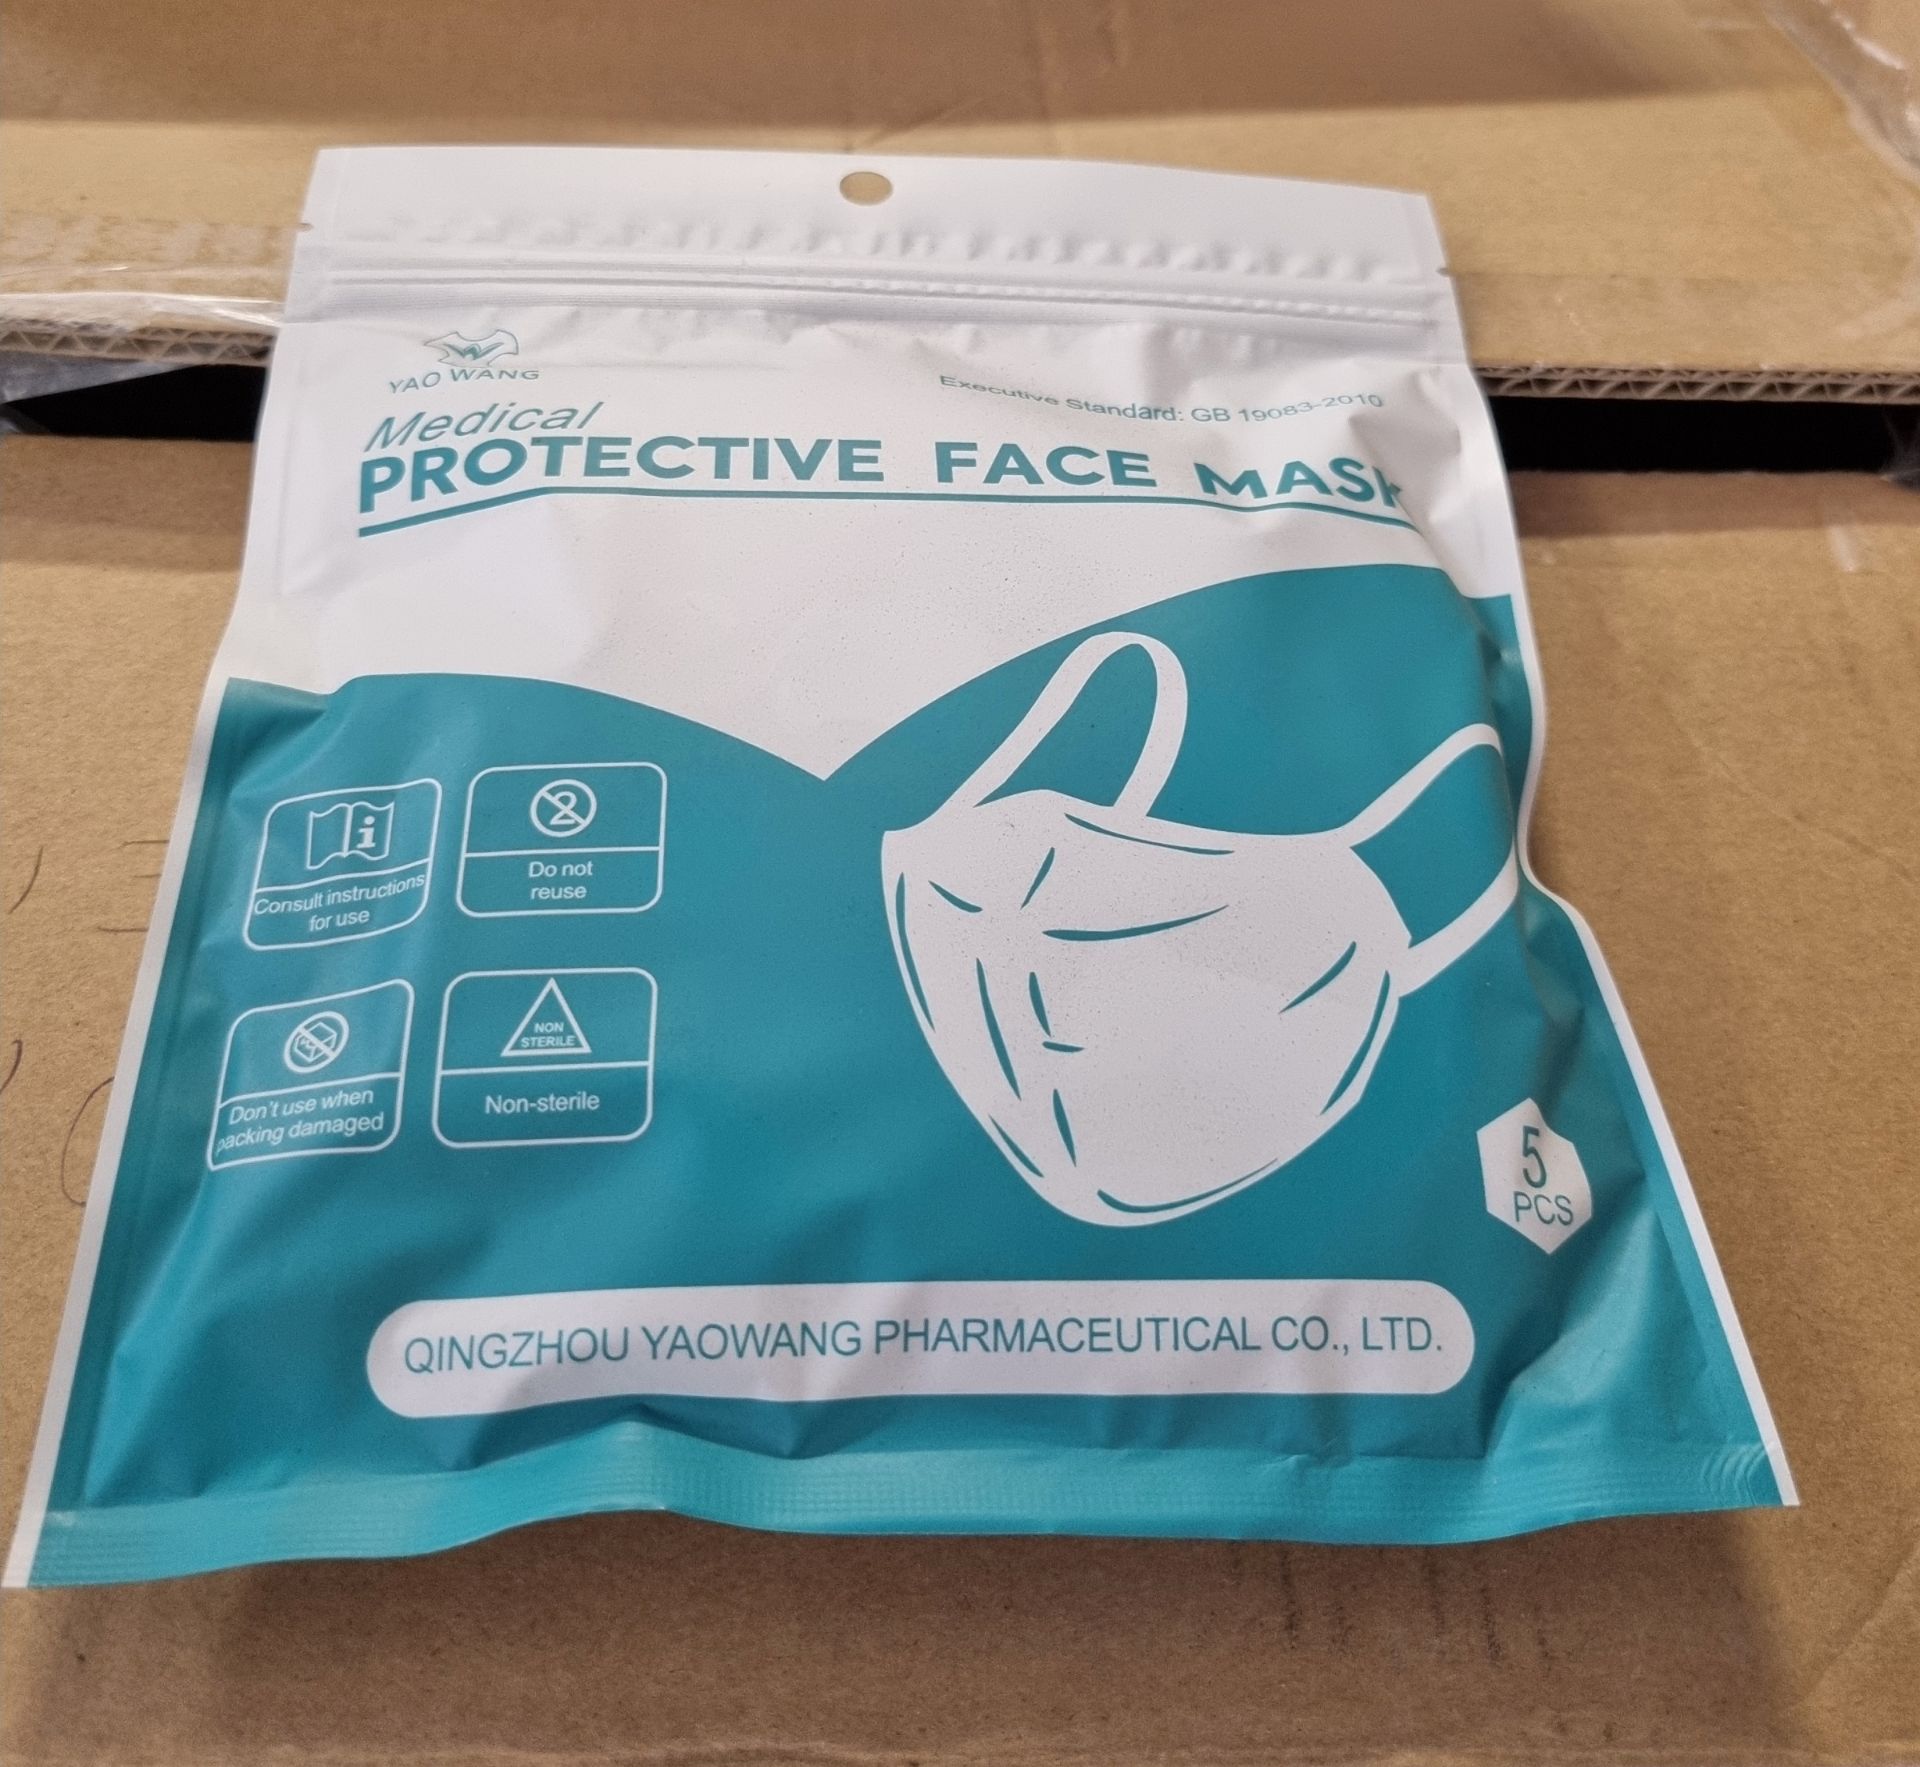 PPE to include various masks & handgel - unknown quantity - Image 13 of 13